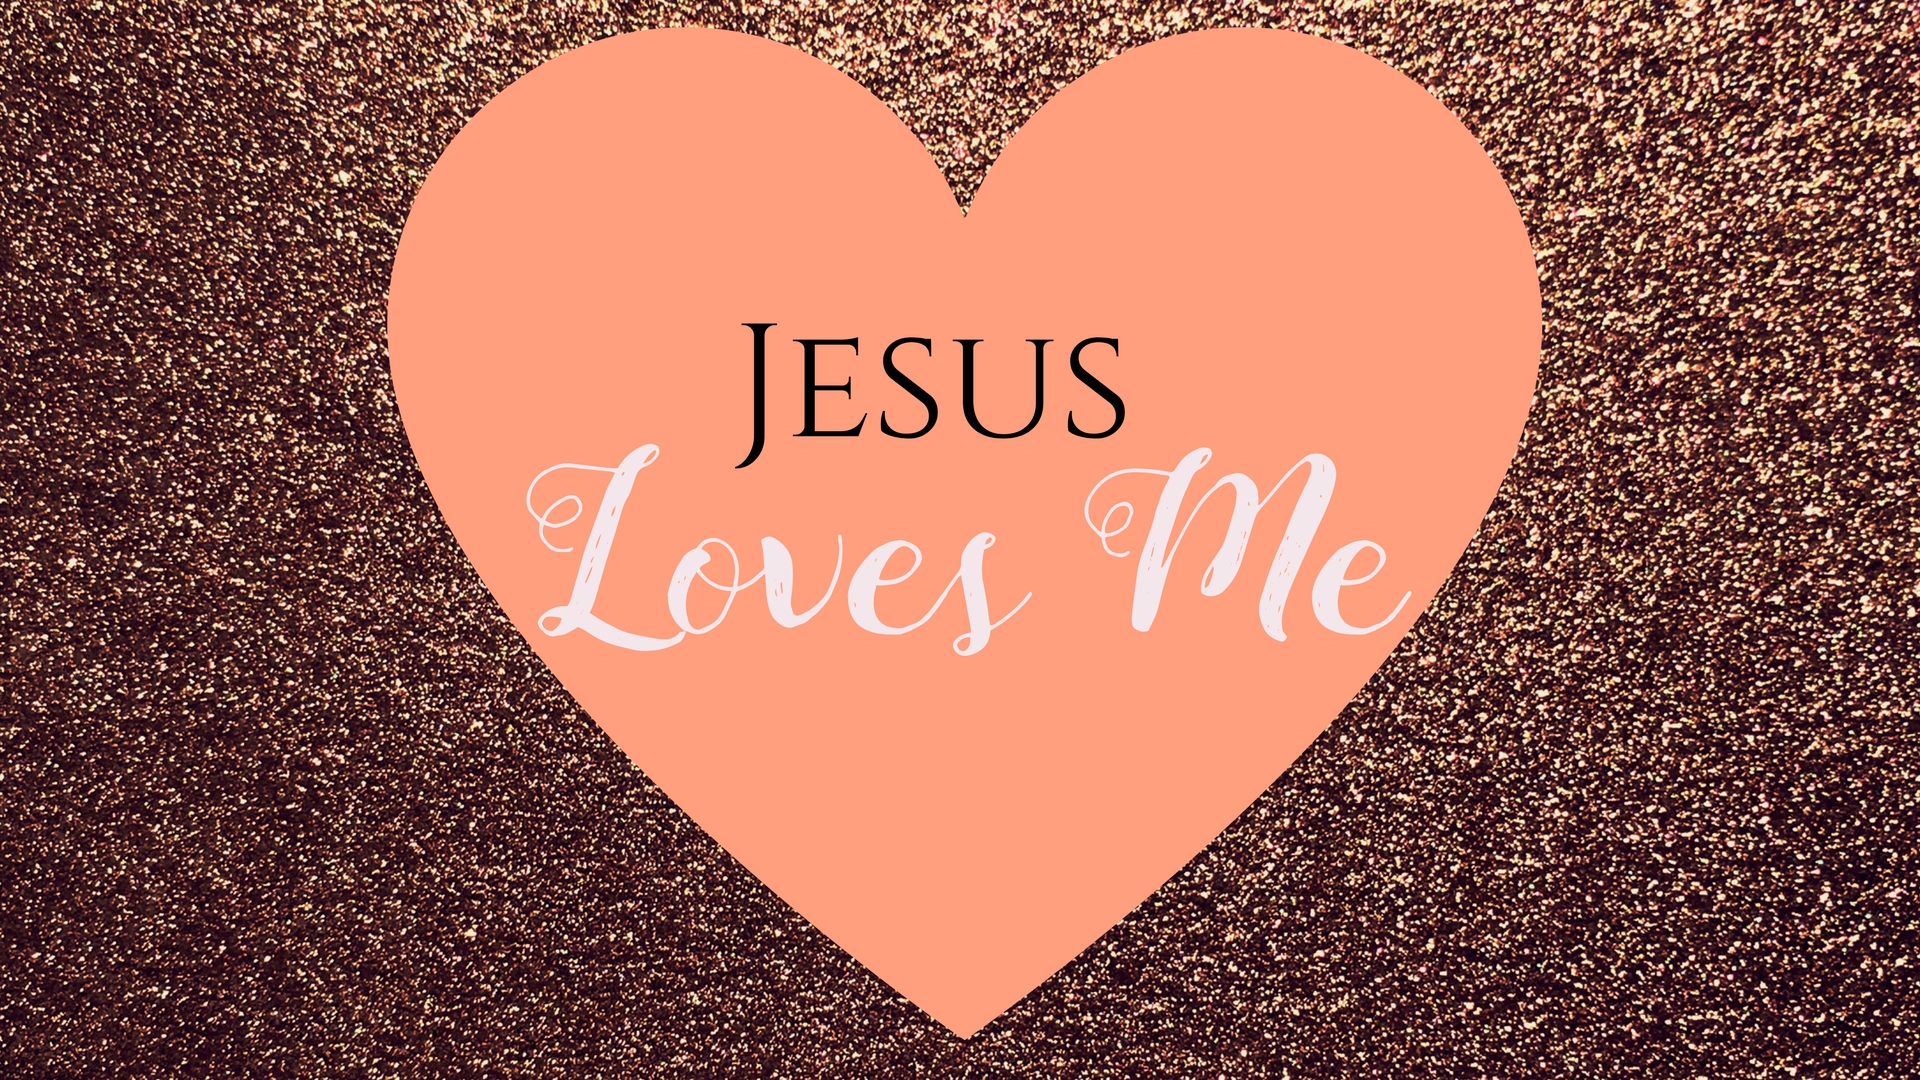 Jsus Loves You Christian Wallpaper Photo And Screensaver For Mobile Iphone And Desktop